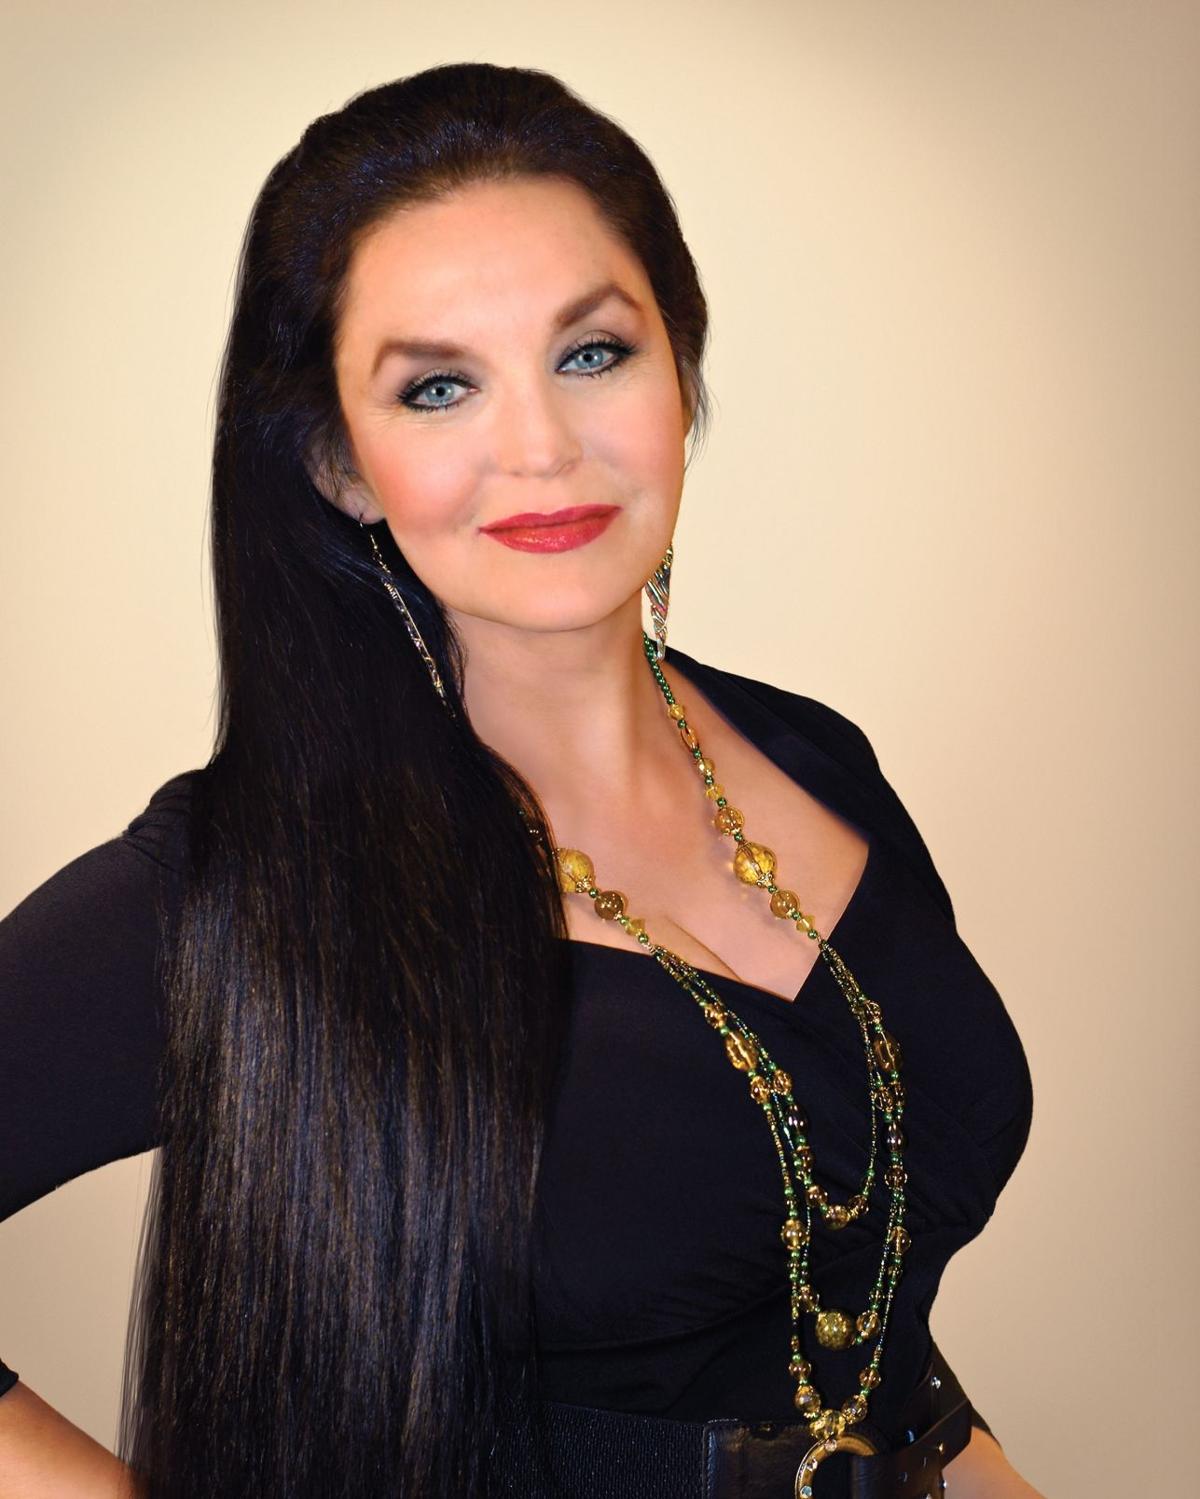 Crystal Gayle to perform her timeless classics at the casino News